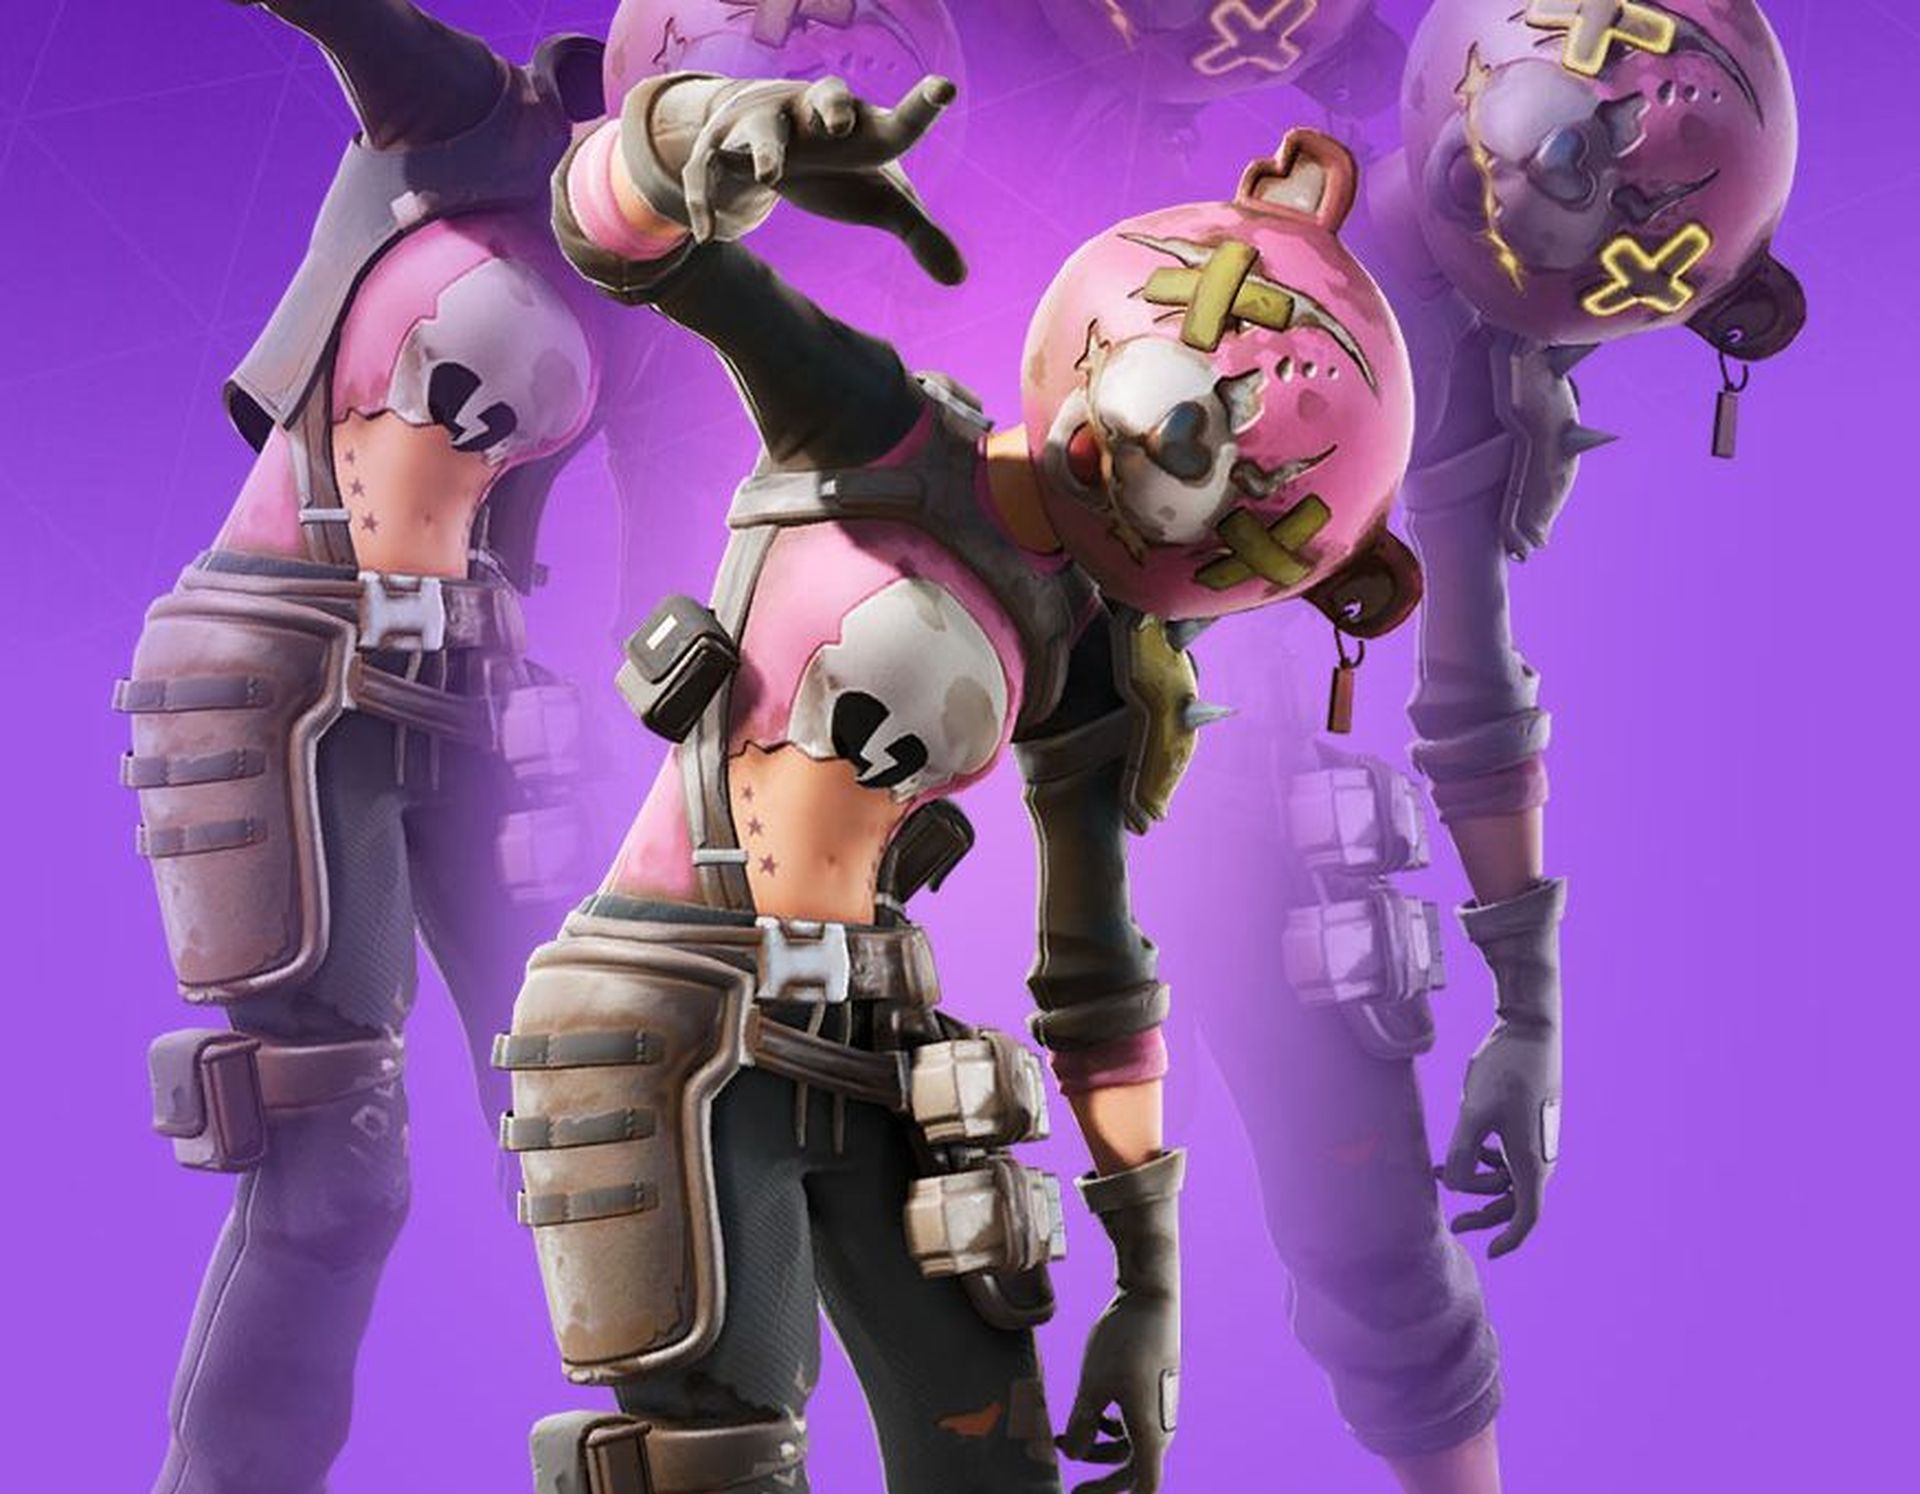 In this article, we are going to be covering how to get the unmasked style for Ragsy in Fortnite, so you can enjoy this skin with the alternate look.